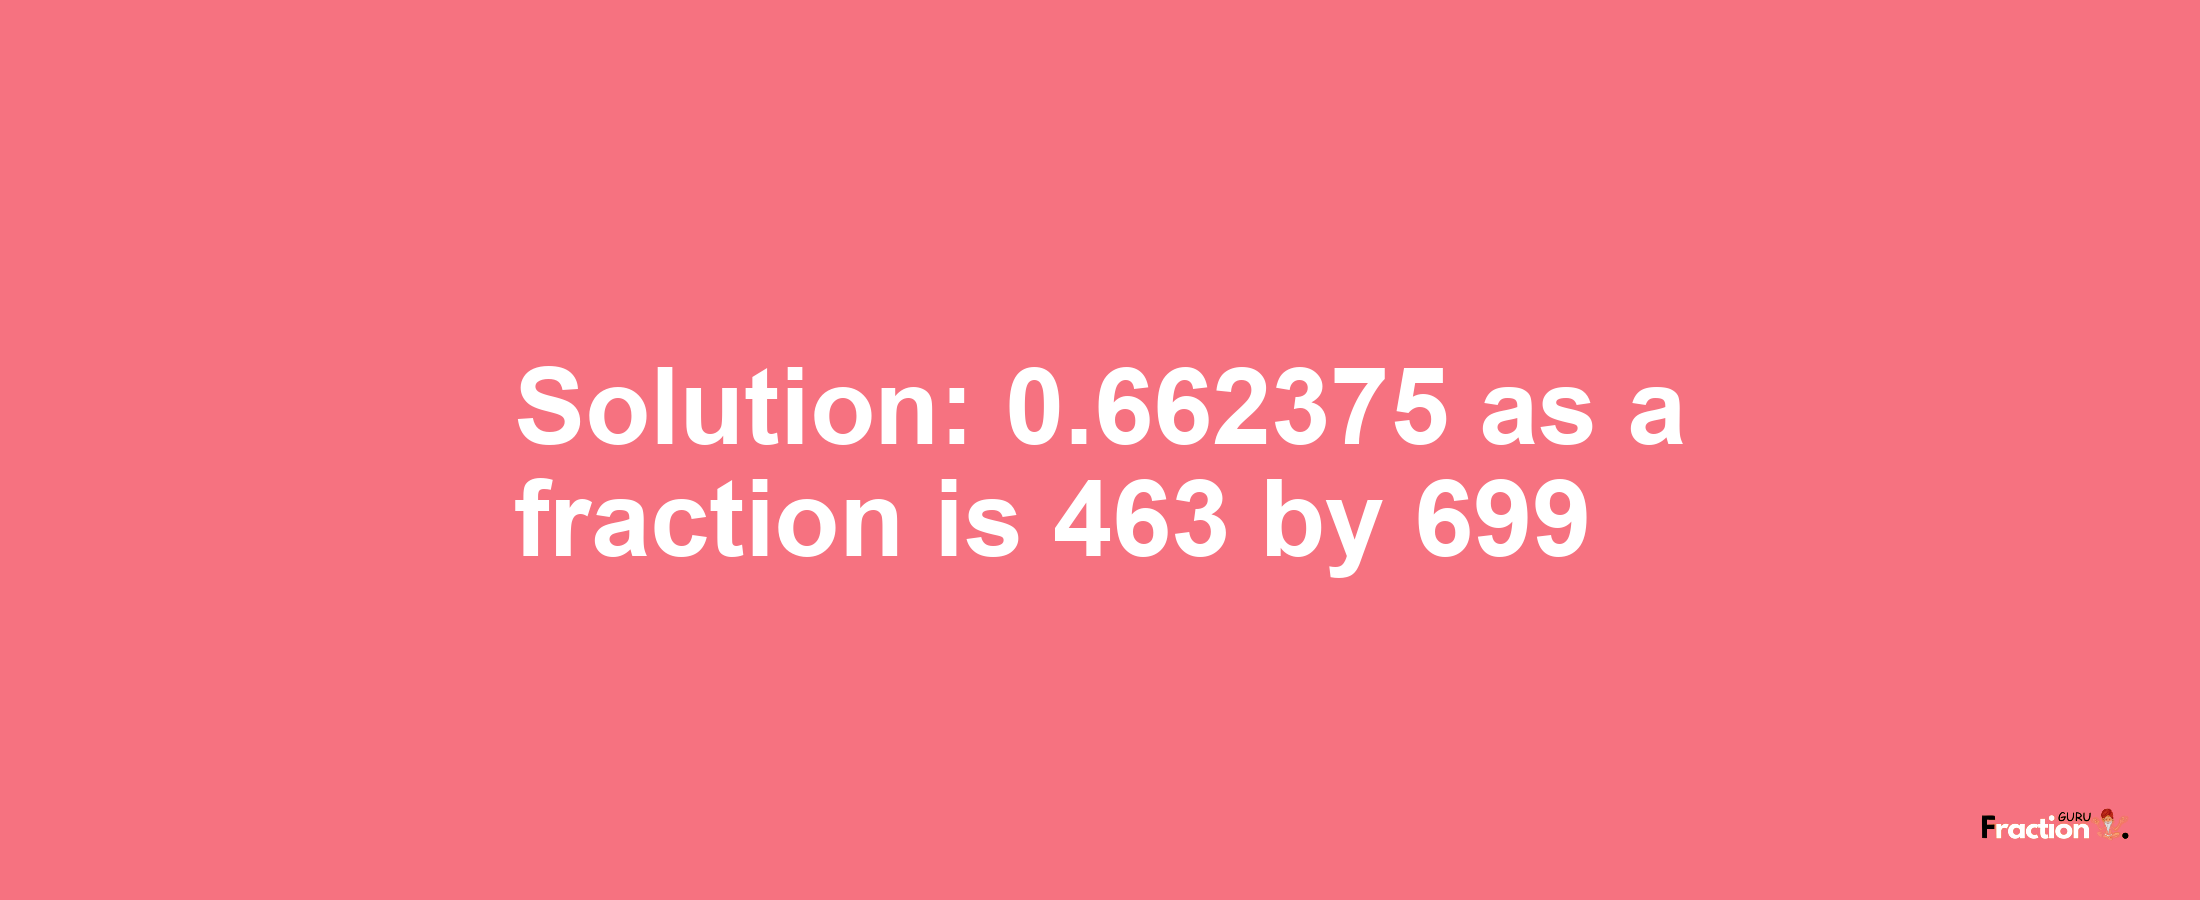 Solution:0.662375 as a fraction is 463/699